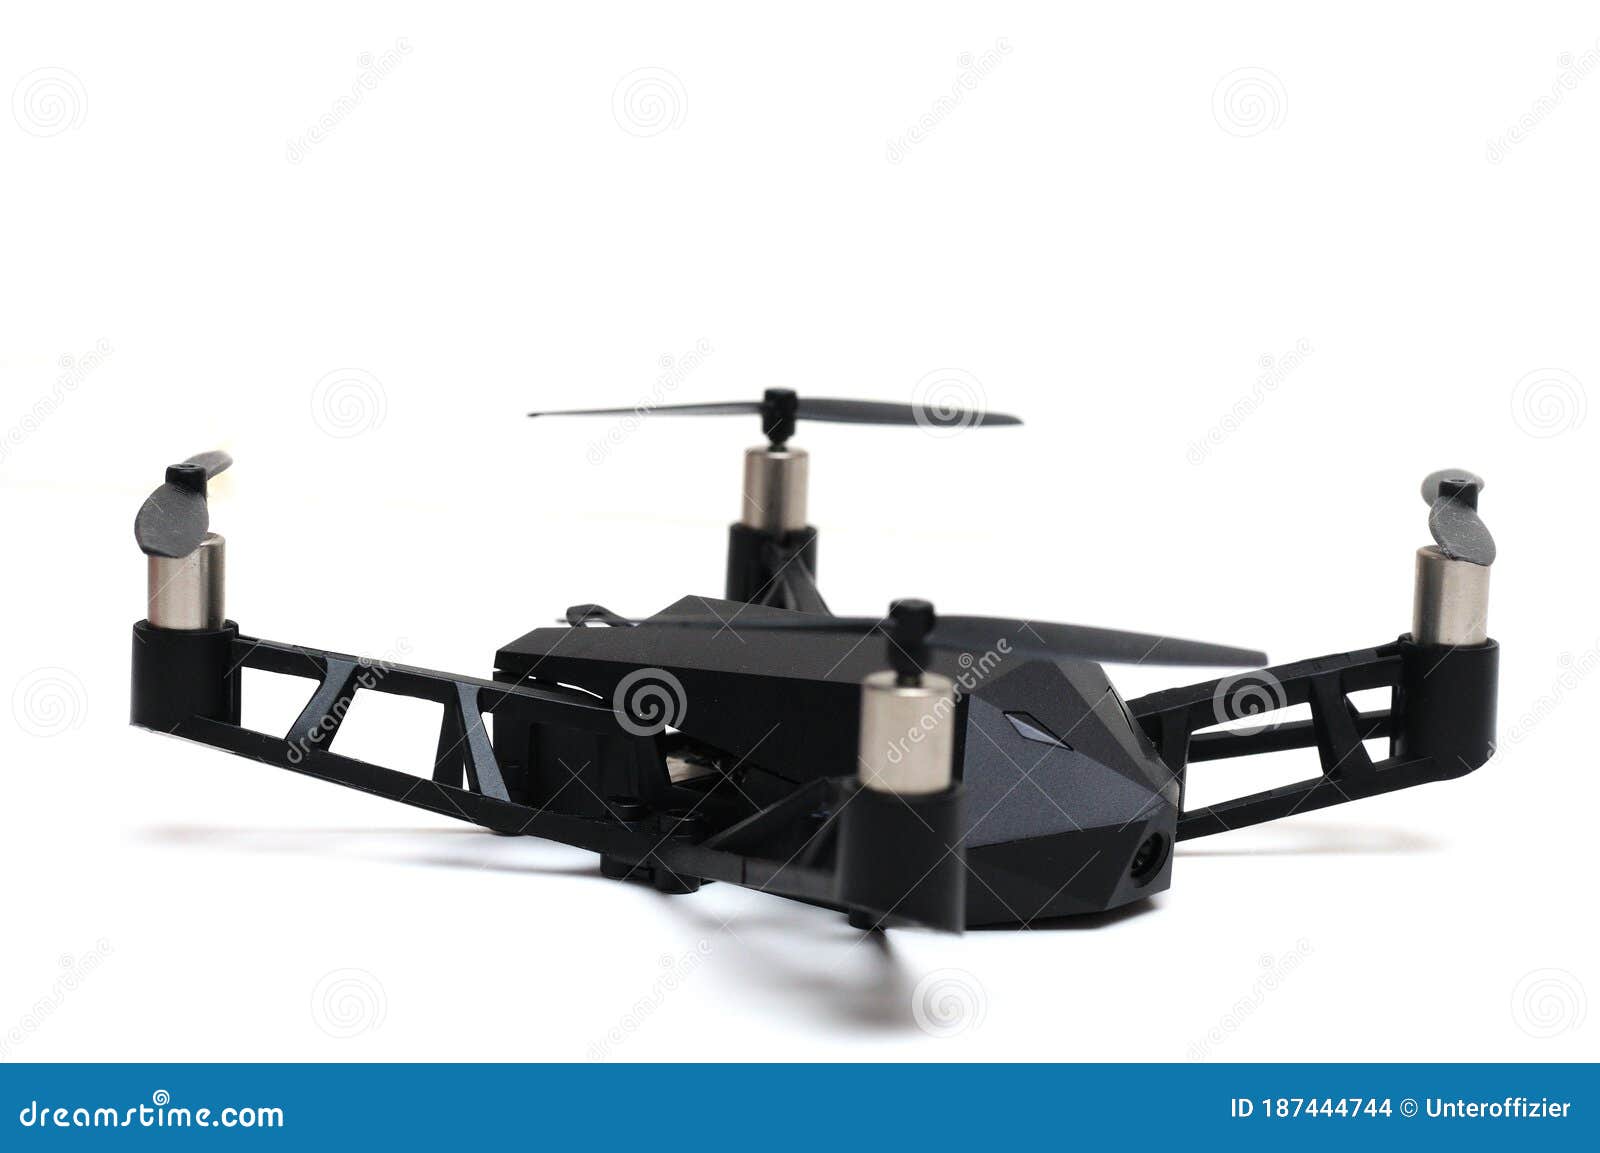 a remote controlled flying drone with four propeller rotors and spy camera on board